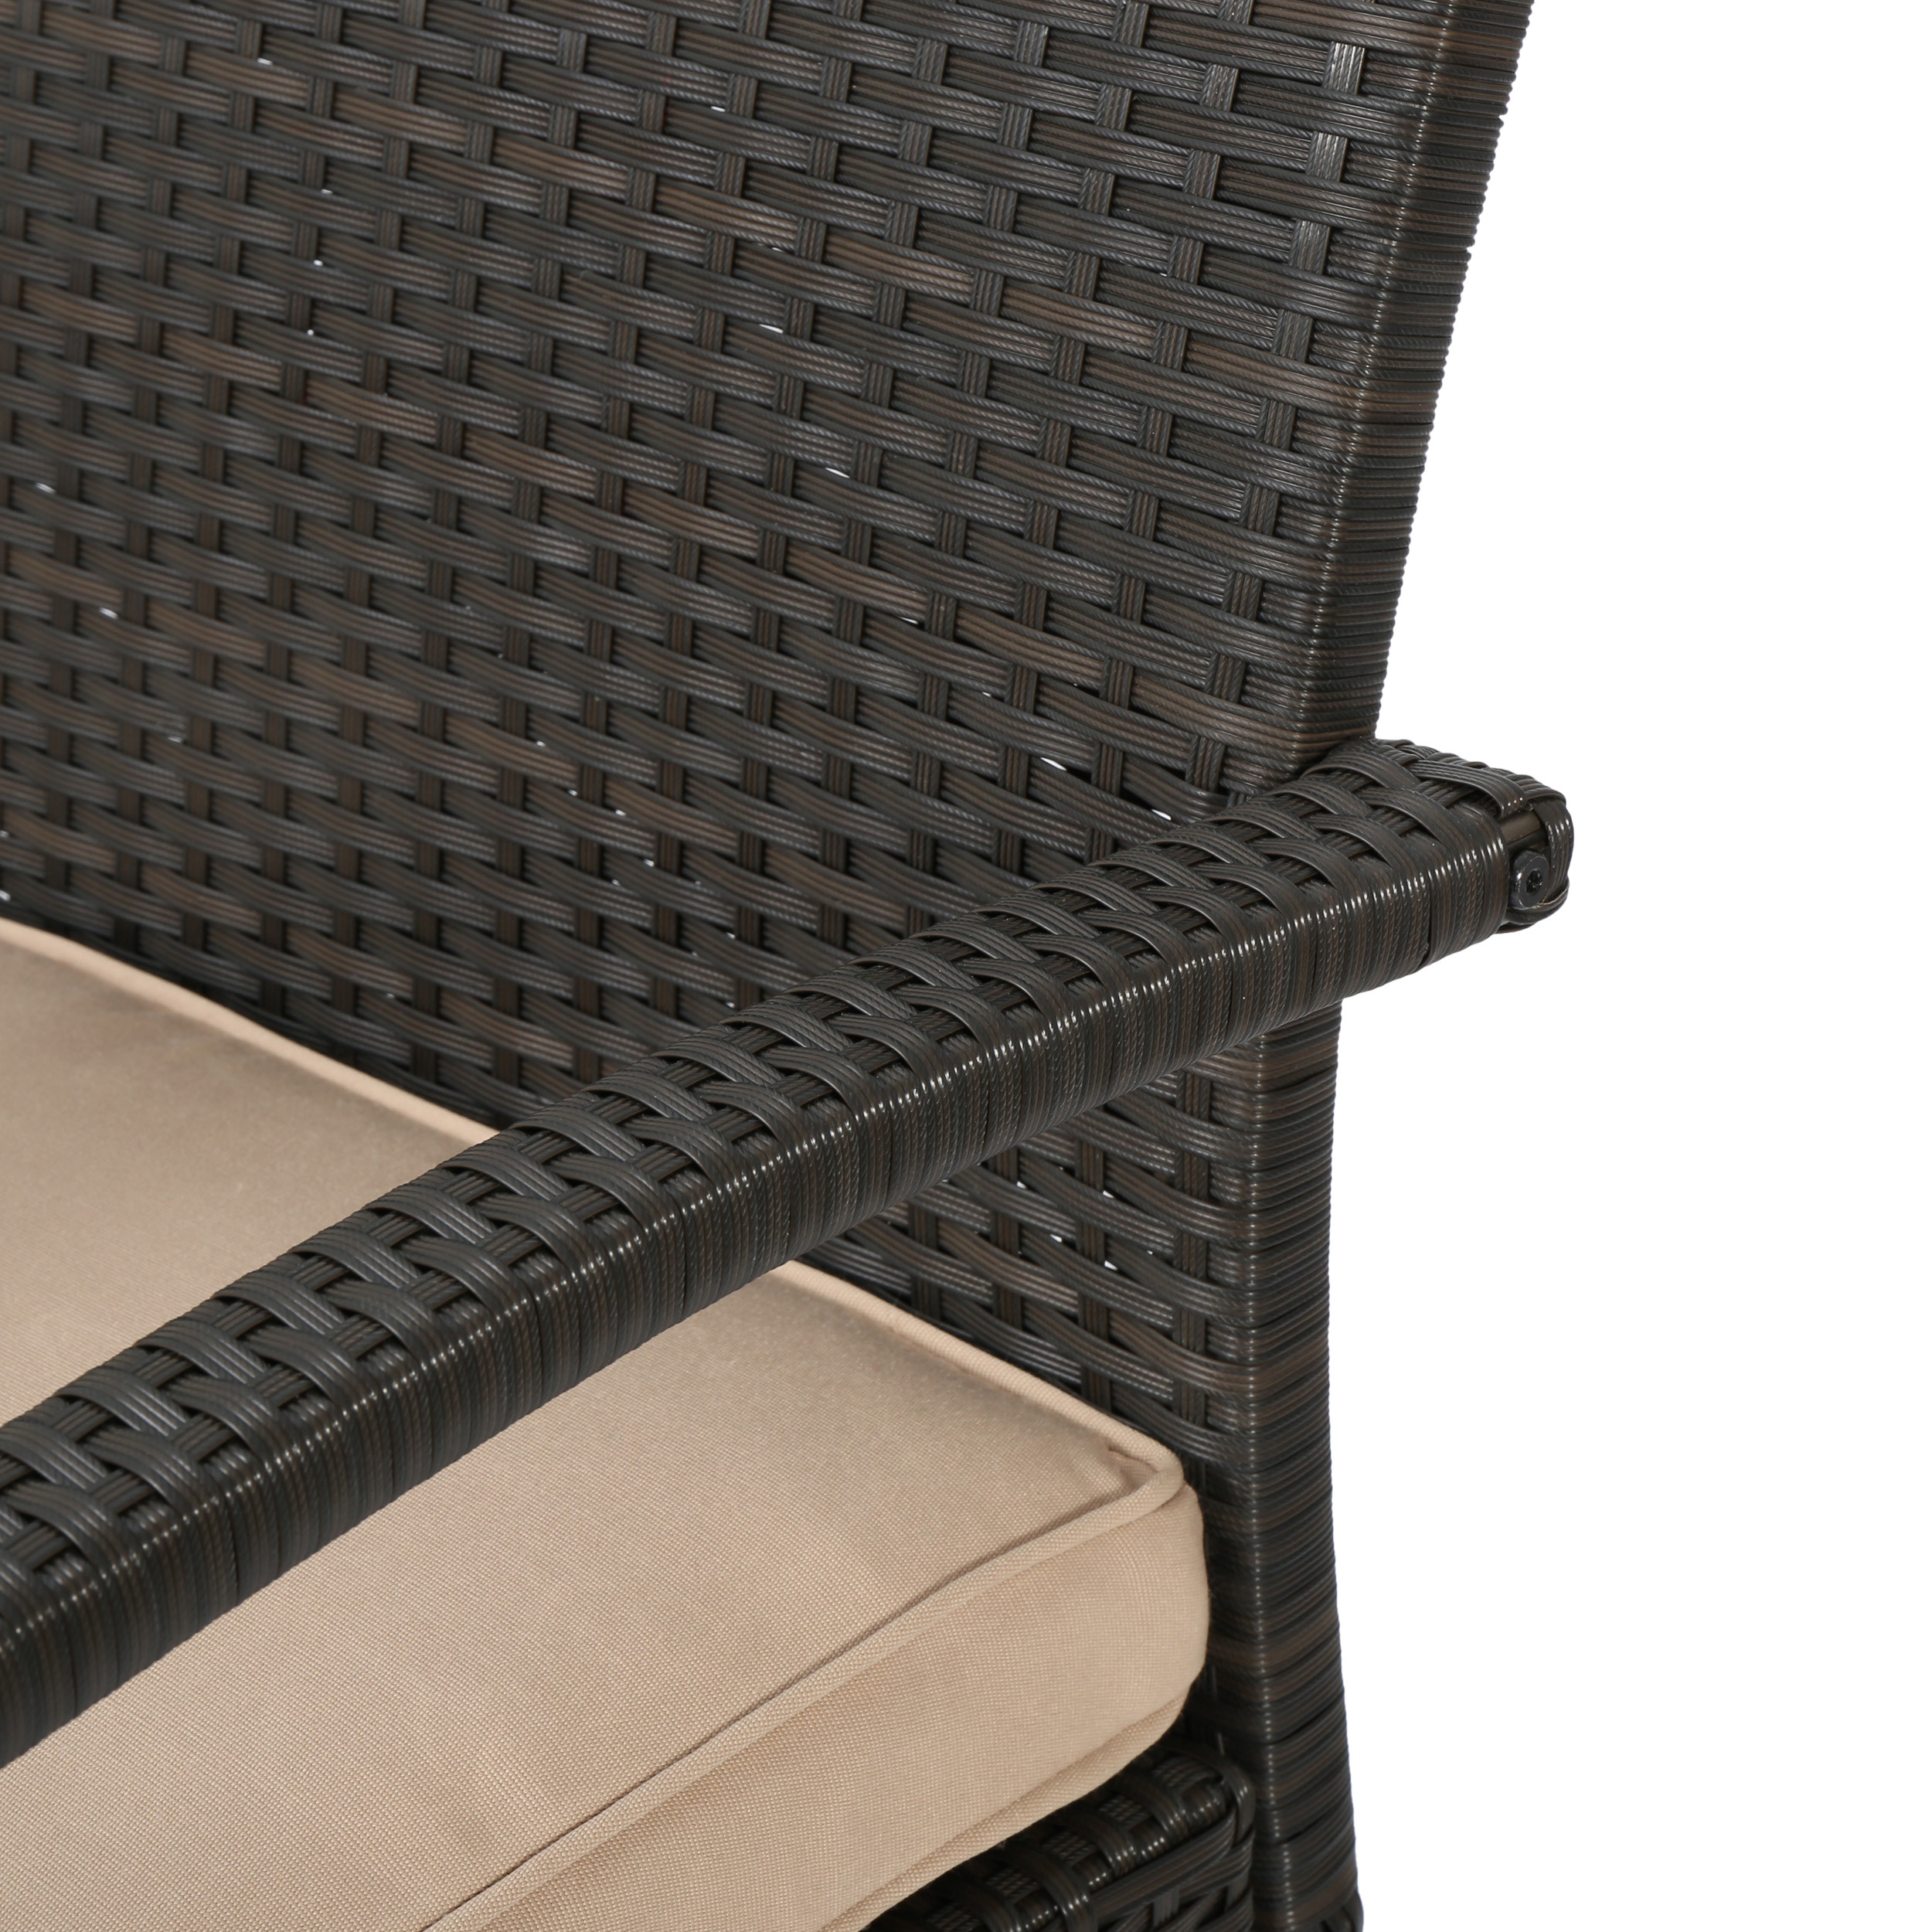 Carmela Outdoor 8 Seater Wicker Chat Set with Cushions, Brown and Tan - image 4 of 11